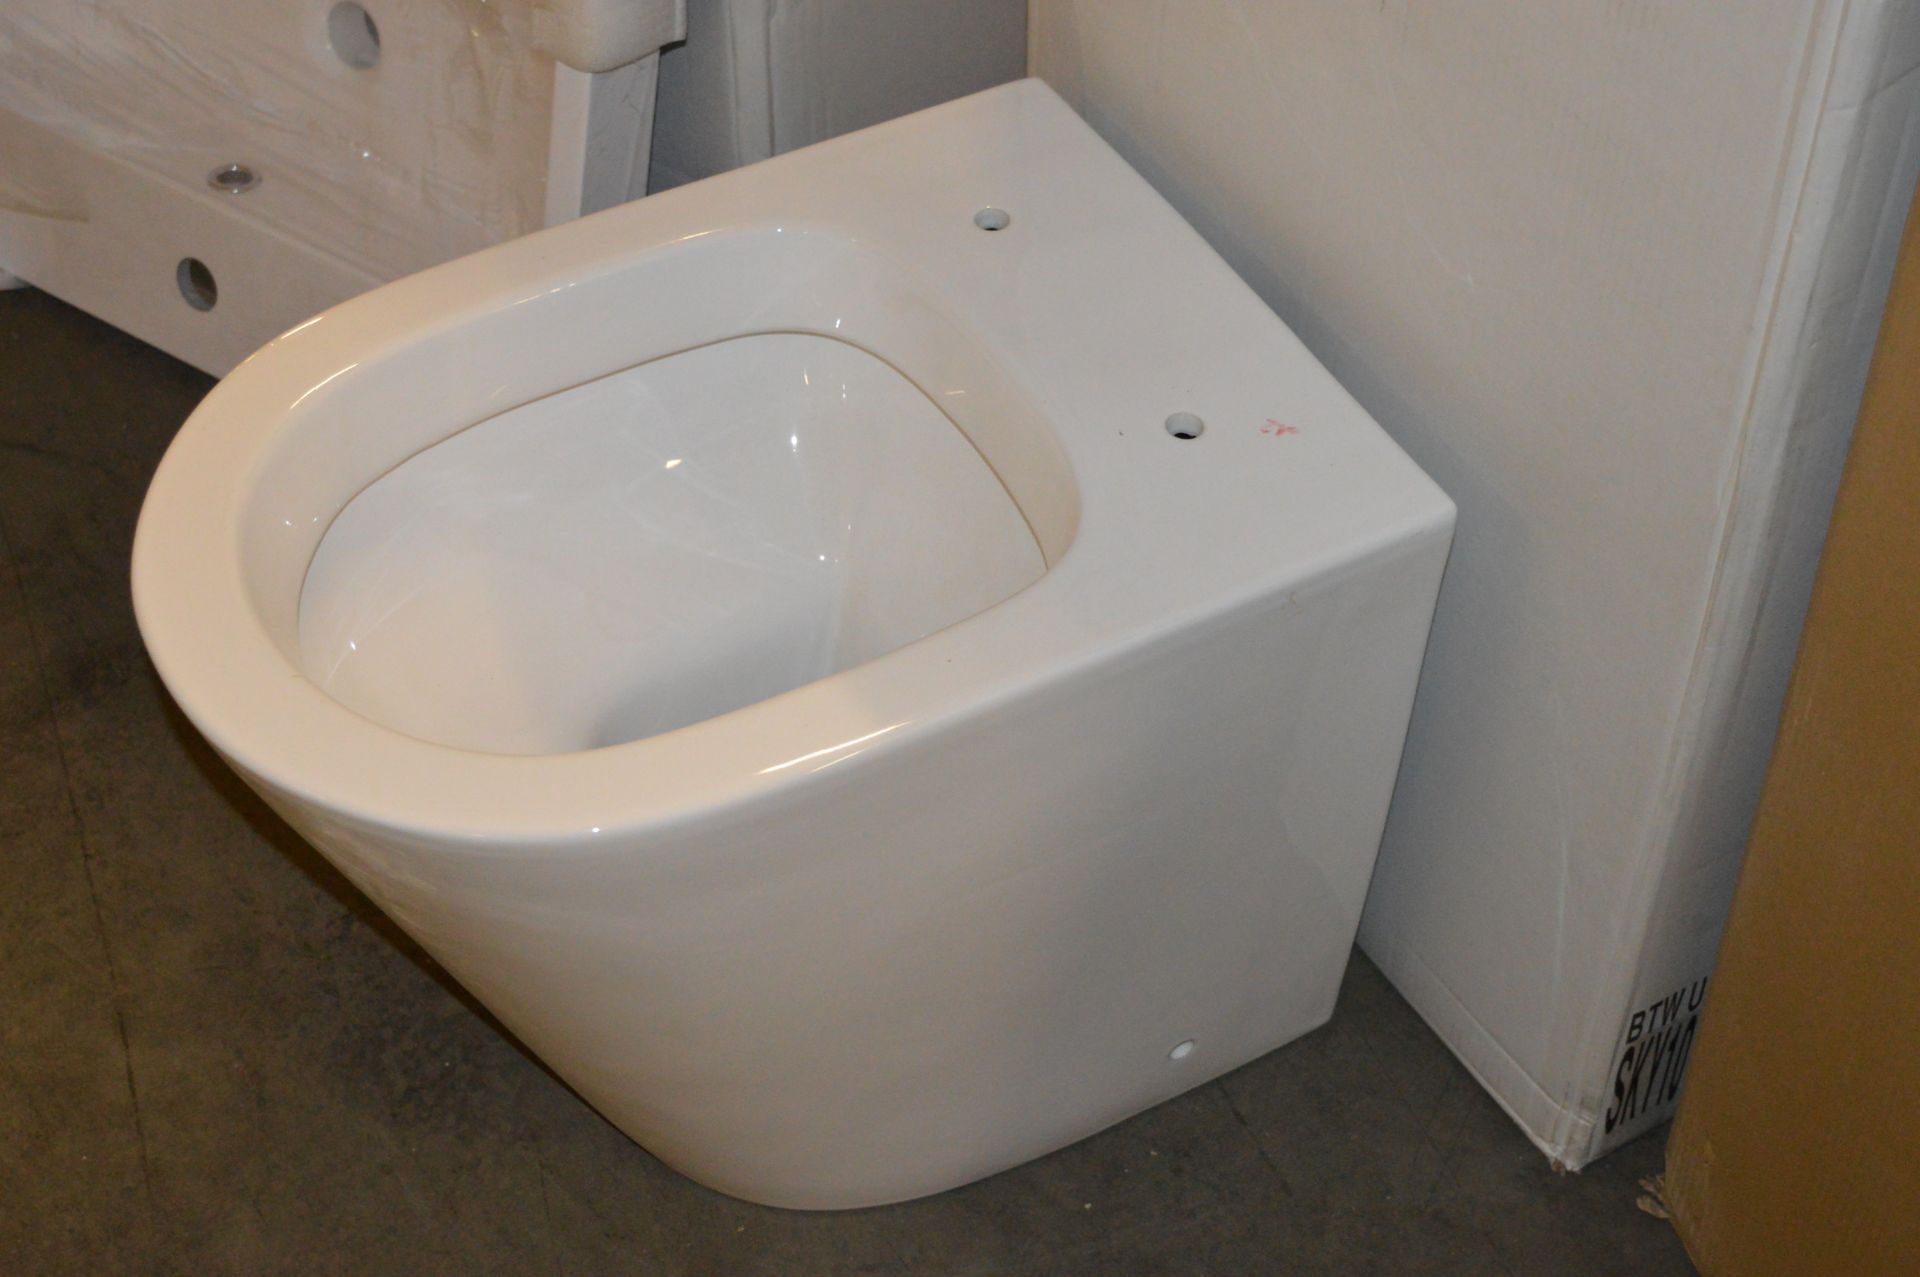 1 x Mode Planet White Gloss Bathroom Suite - Includes 600mm Vanity Soft Close Drawer Unit With - Image 4 of 14